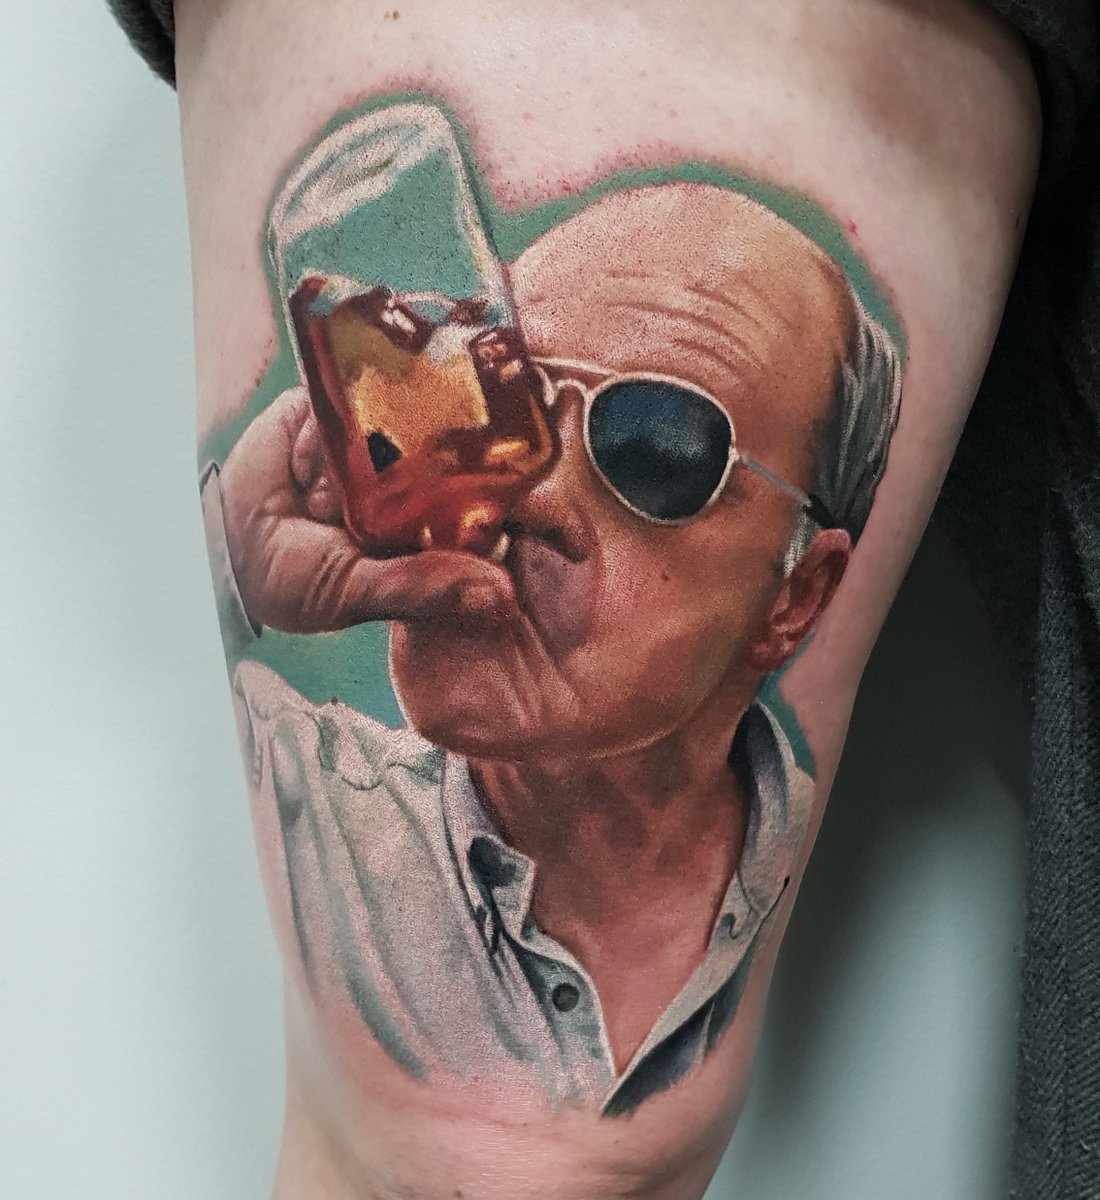 Holy F Boys Check Out These Decent Trailer Park Boys Fan Tattoos   Tattoodo